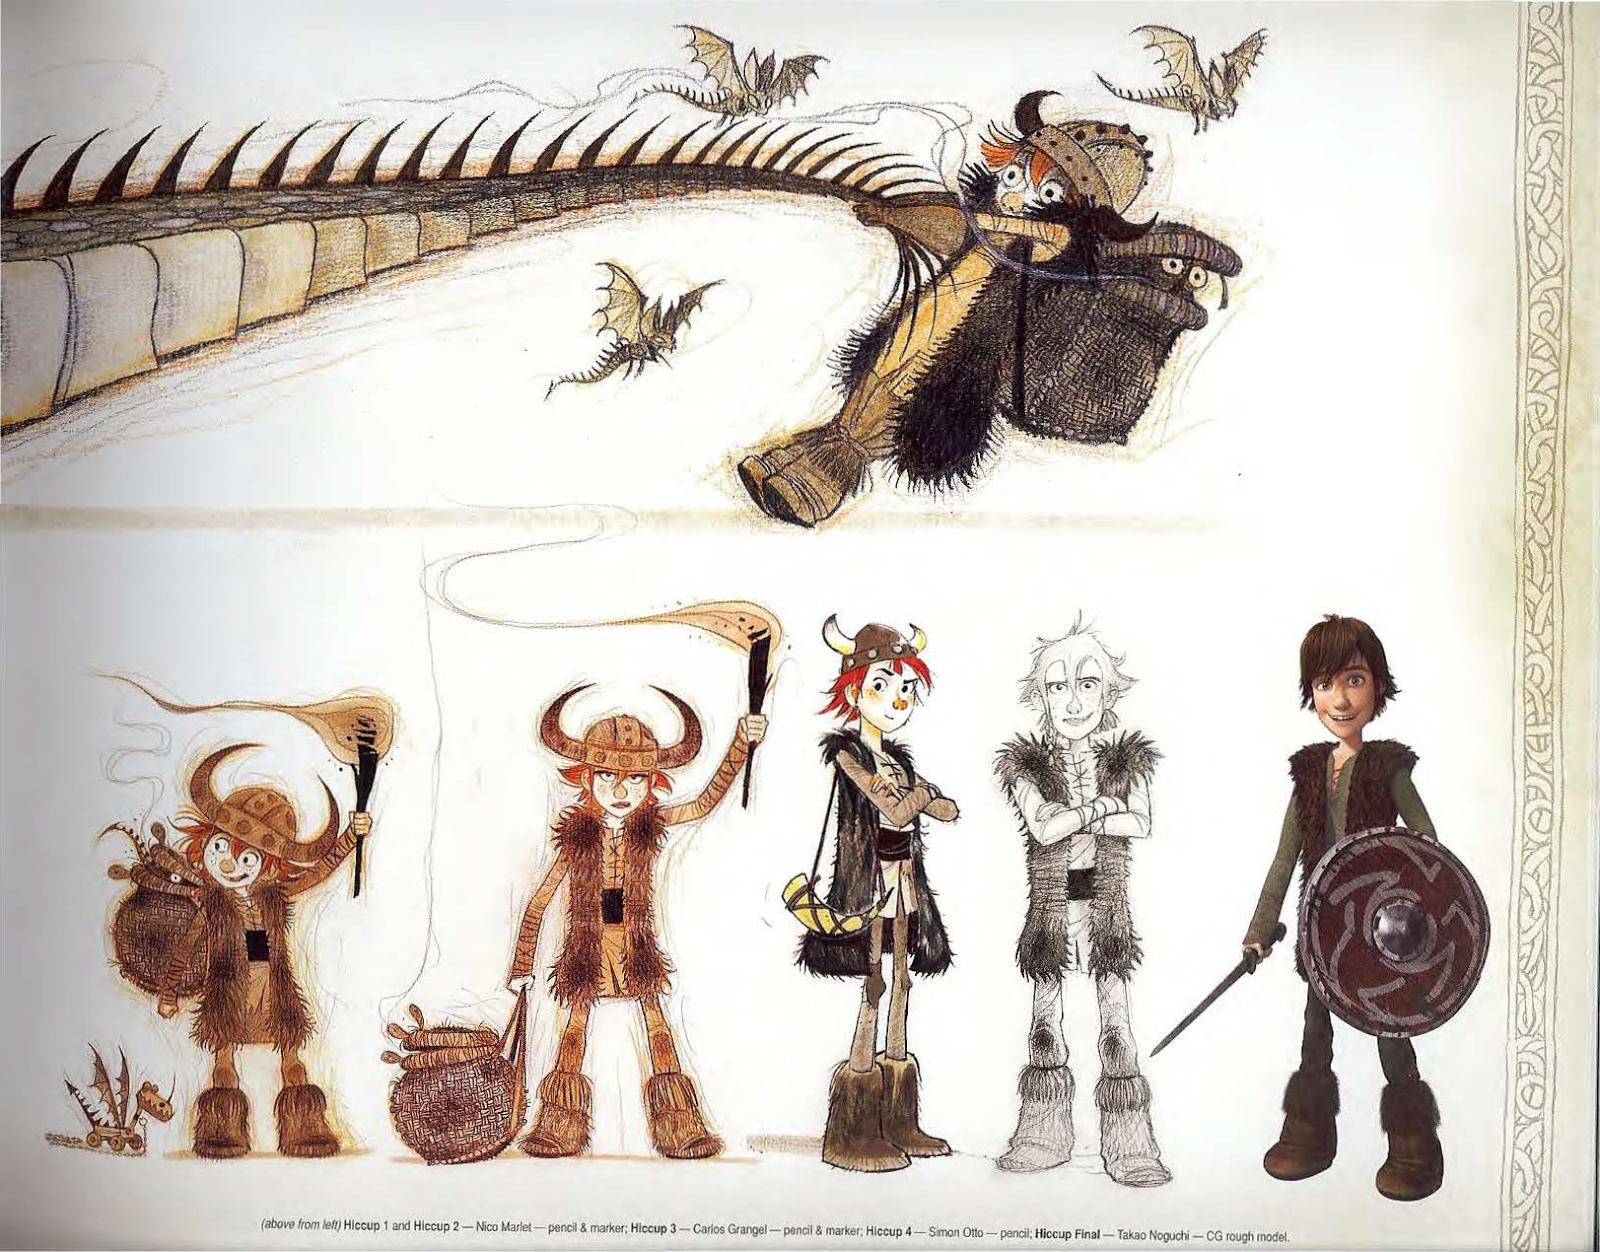 Artbook for the first part of "How to Train Your Dragon"! 